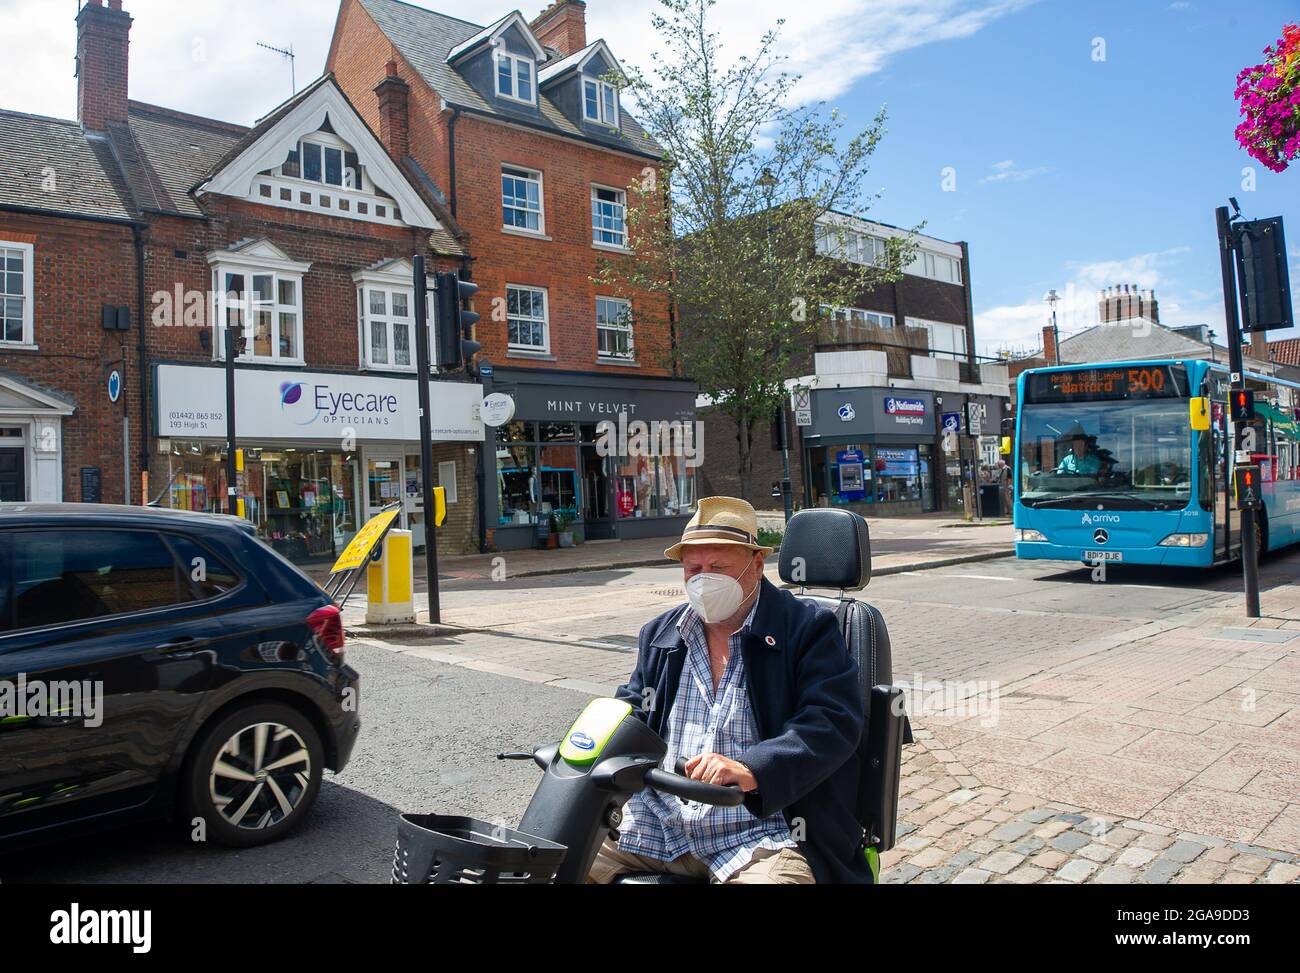 Berkhamsted, Hertfordshire, UK. 28th July, 2021. Shoppers in Berkhamsted High Street today on market day. Credit: Maureen McLean/Alamy Stock Photo